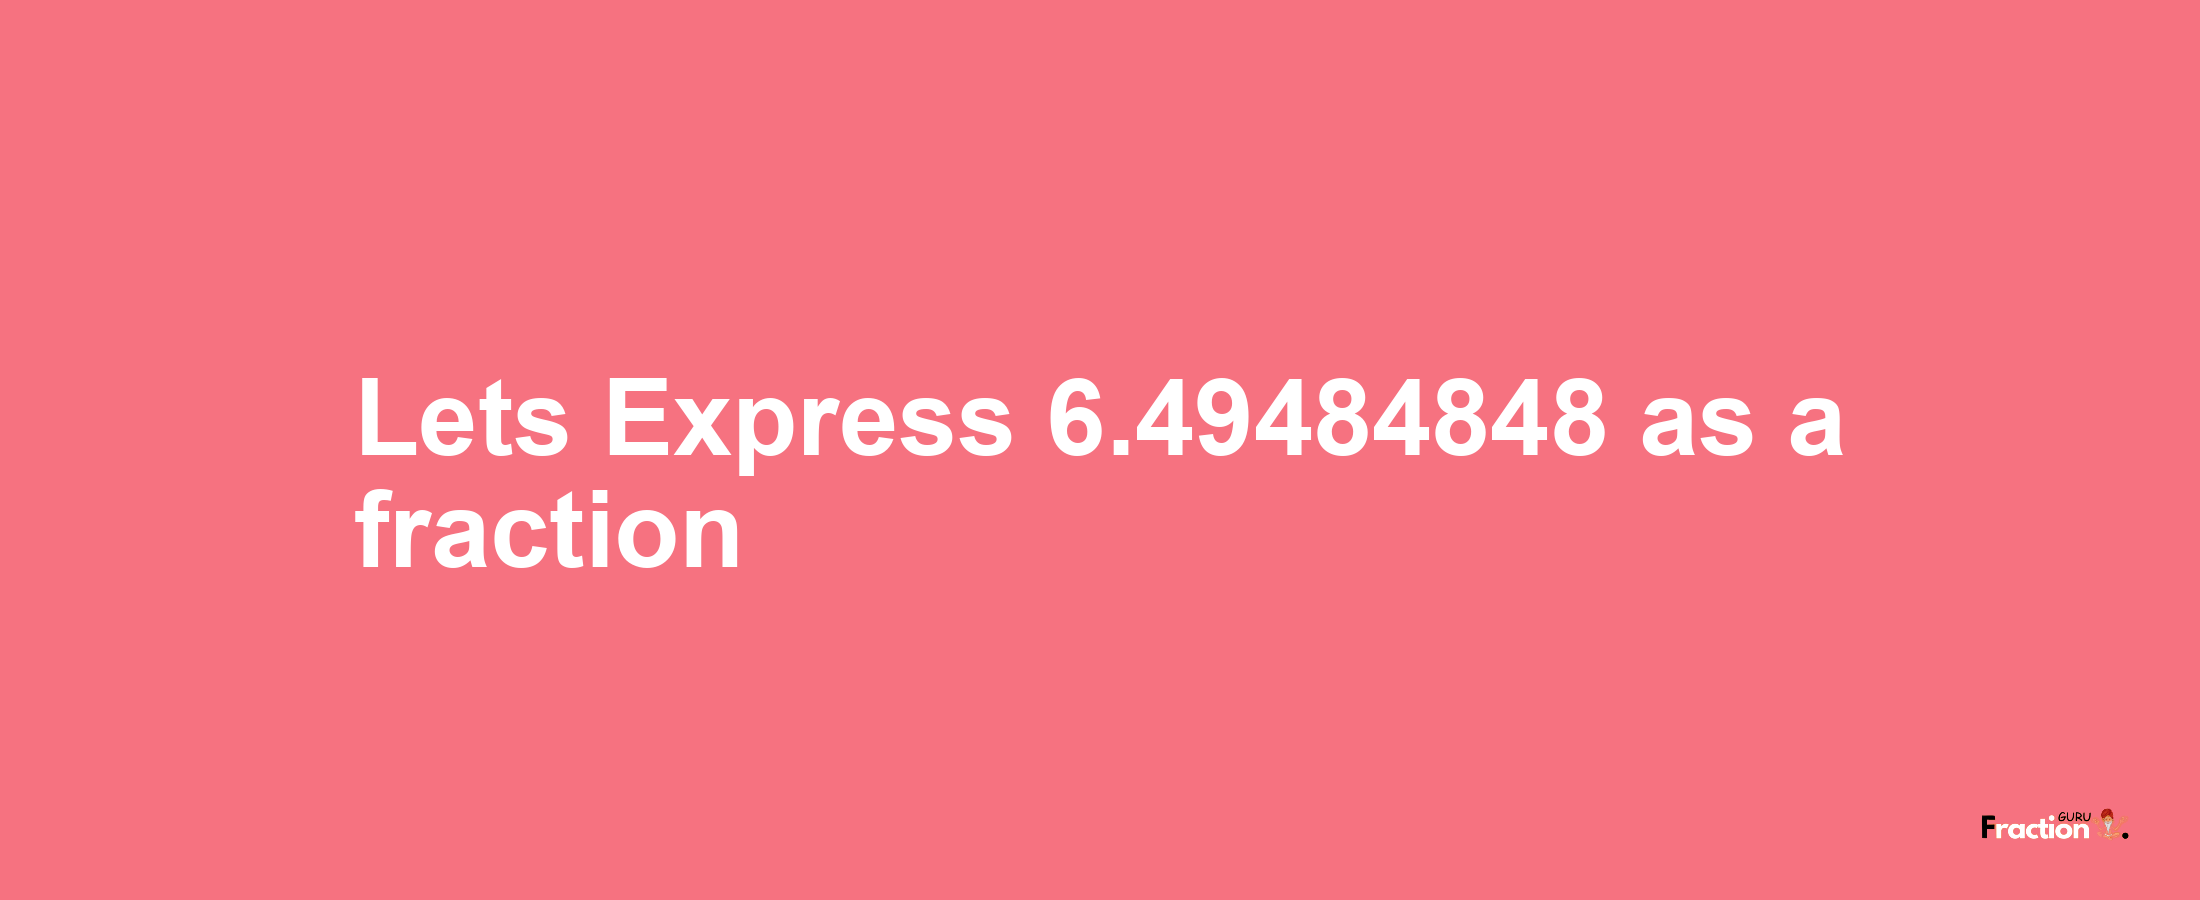 Lets Express 6.49484848 as afraction